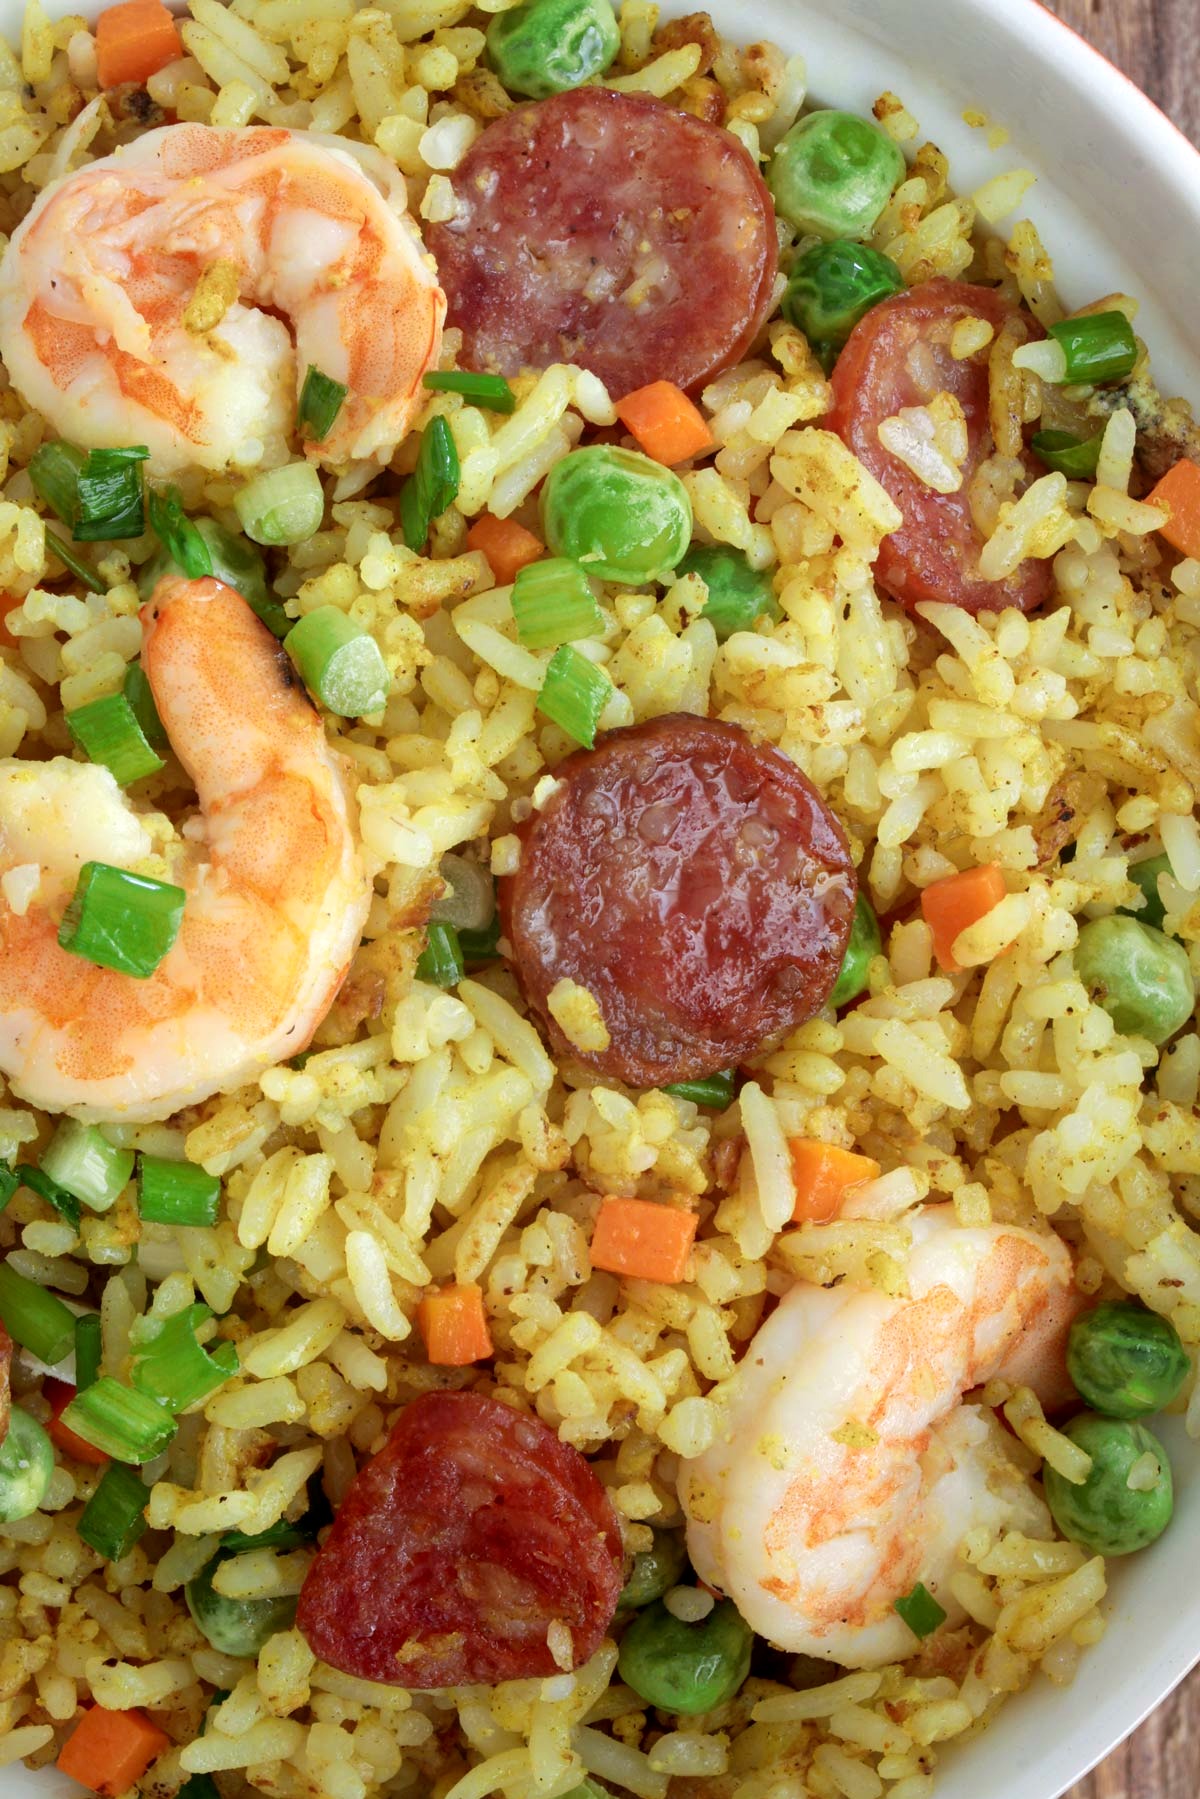 Yang Chow fried rice  loaded with shrimp, sausages, eggs, carrots, and green peas.